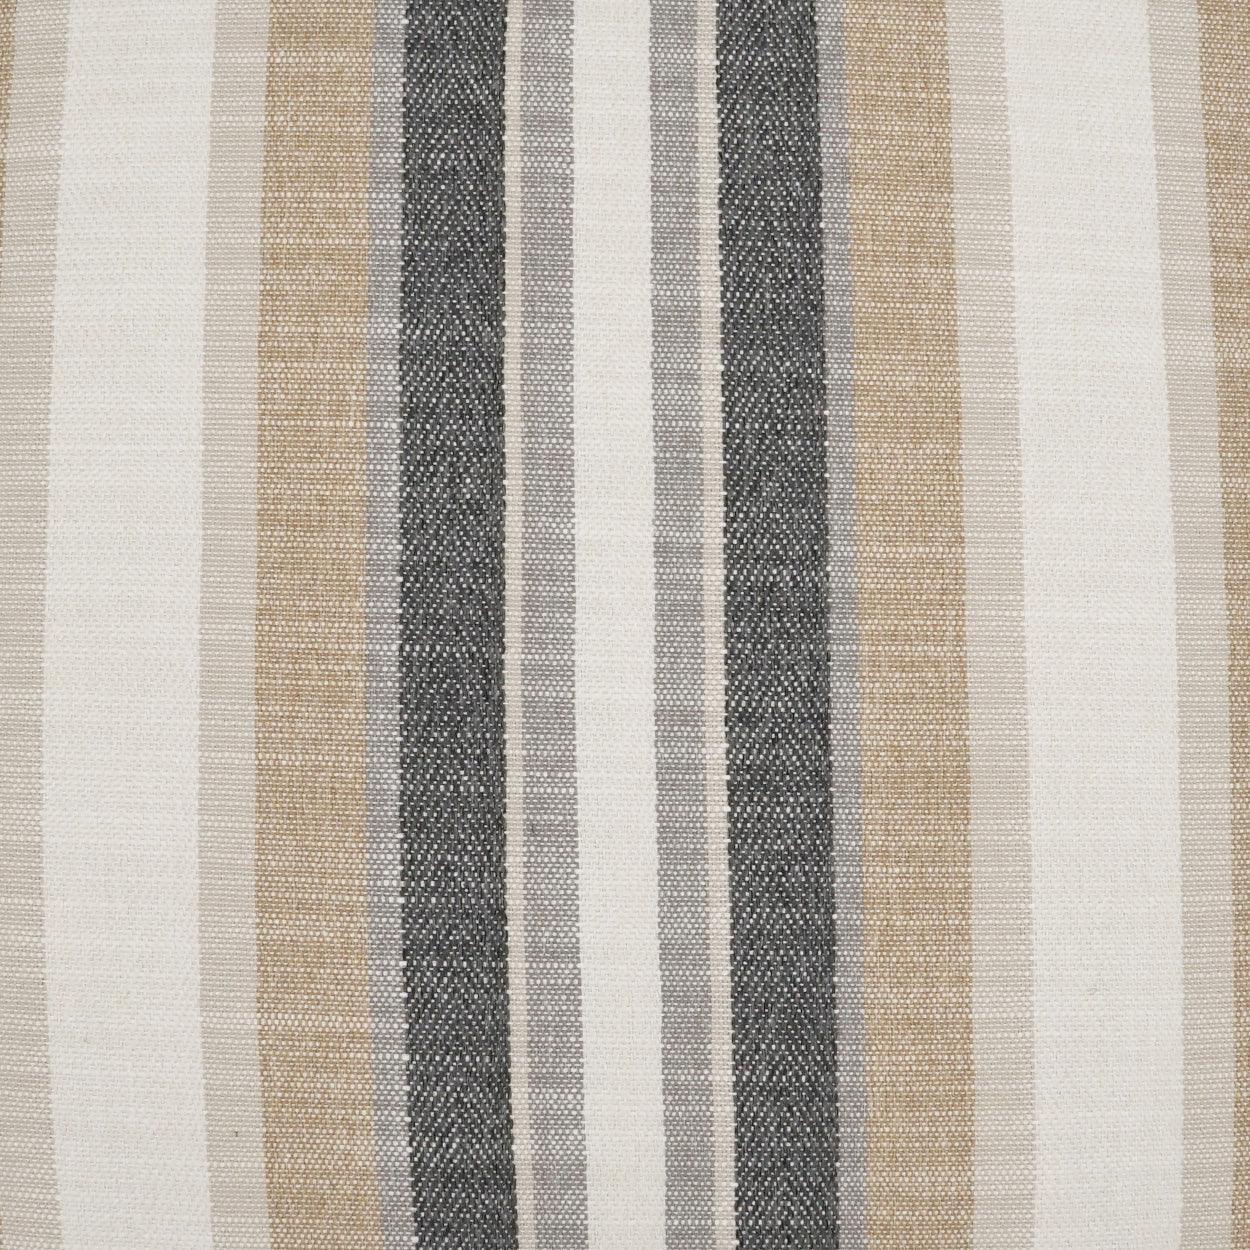 Ponce Western Chic Stripes Tan Taupe Large Throw Pillow With Insert - Uptown Sebastian